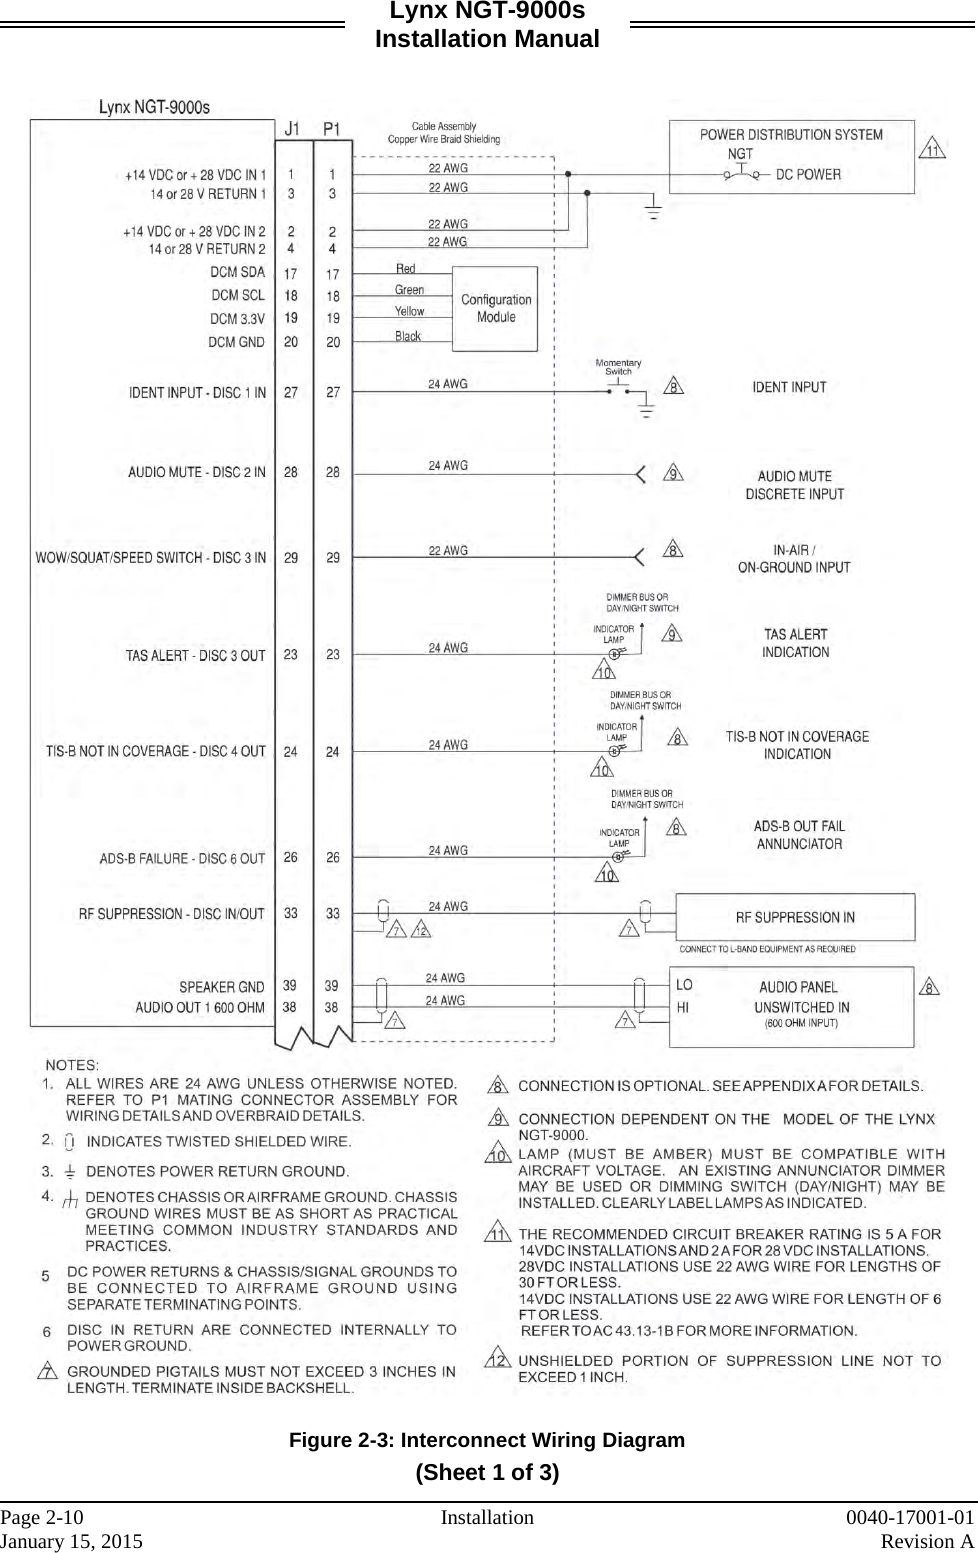 Lynx NGT-9000s Installation Manual     Figure 2-3: Interconnect Wiring Diagram  (Sheet 1 of 3)   Page 2-10 Installation 0040-17001-01 January 15, 2015    Revision A  